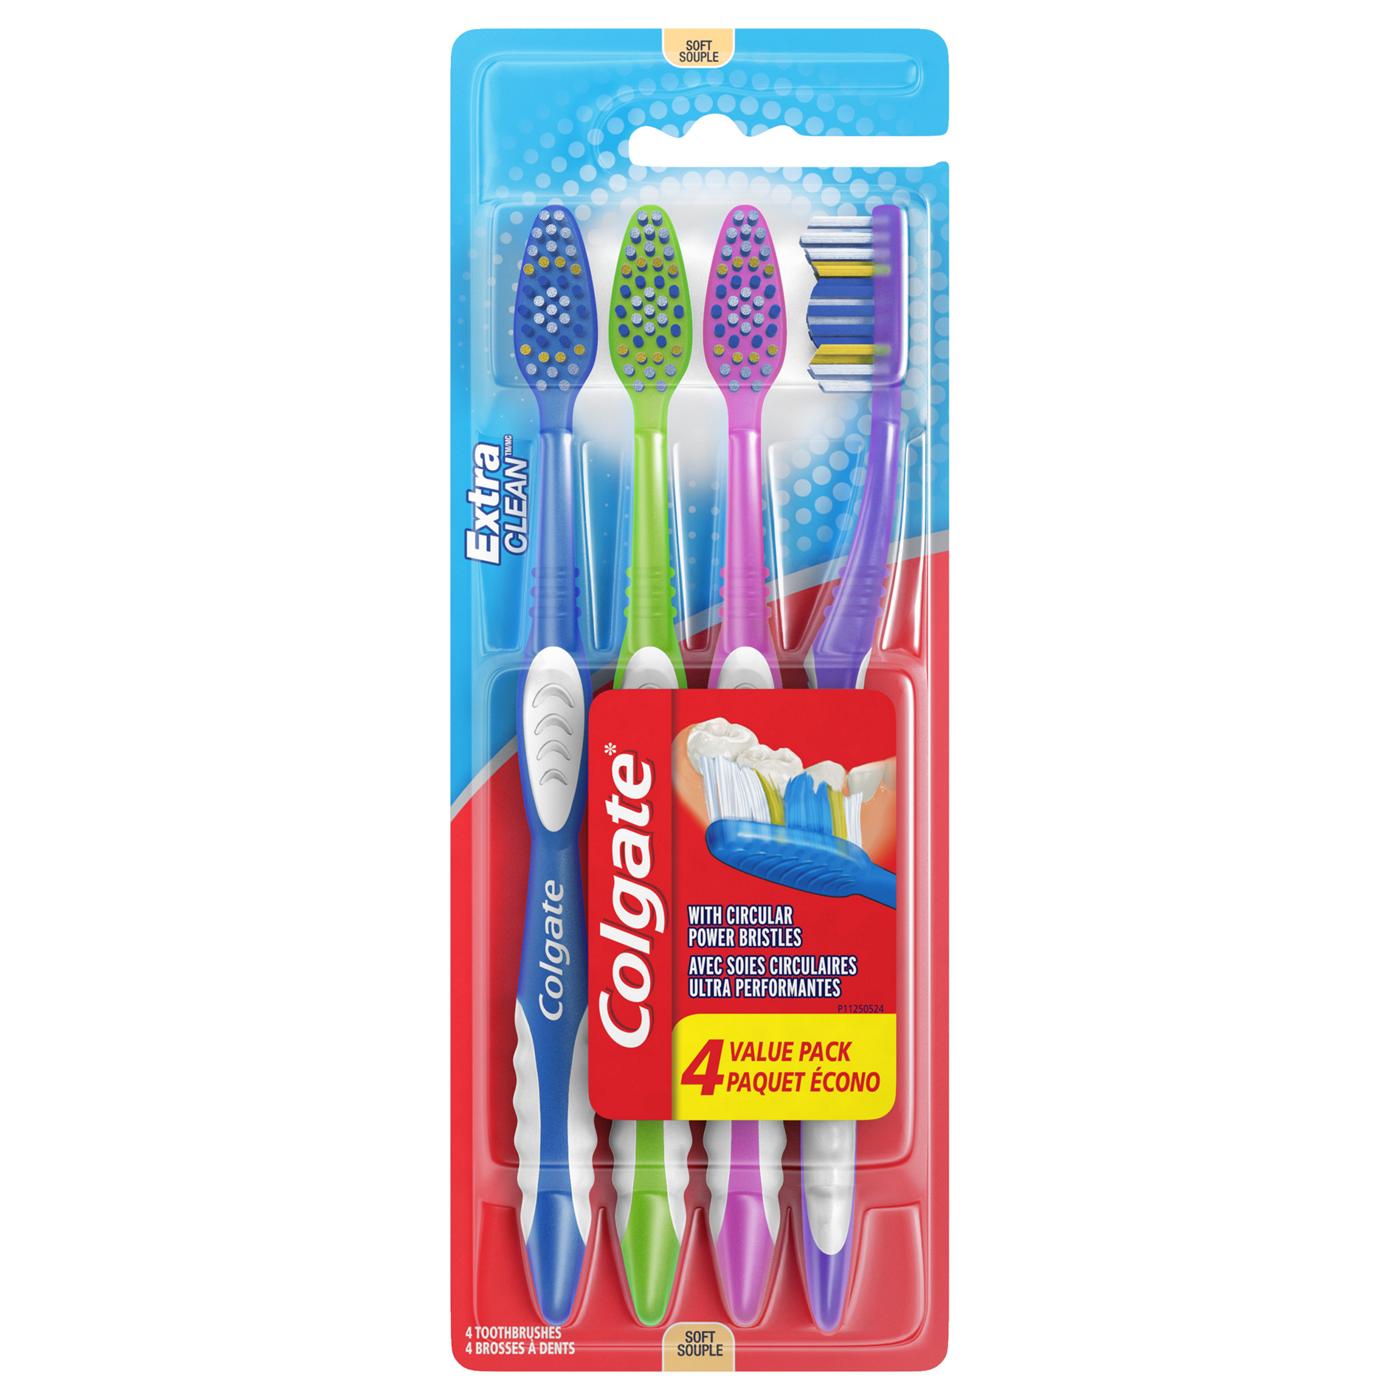 Colgate Extra Clean Toothbrush Value Pack Soft; image 1 of 2